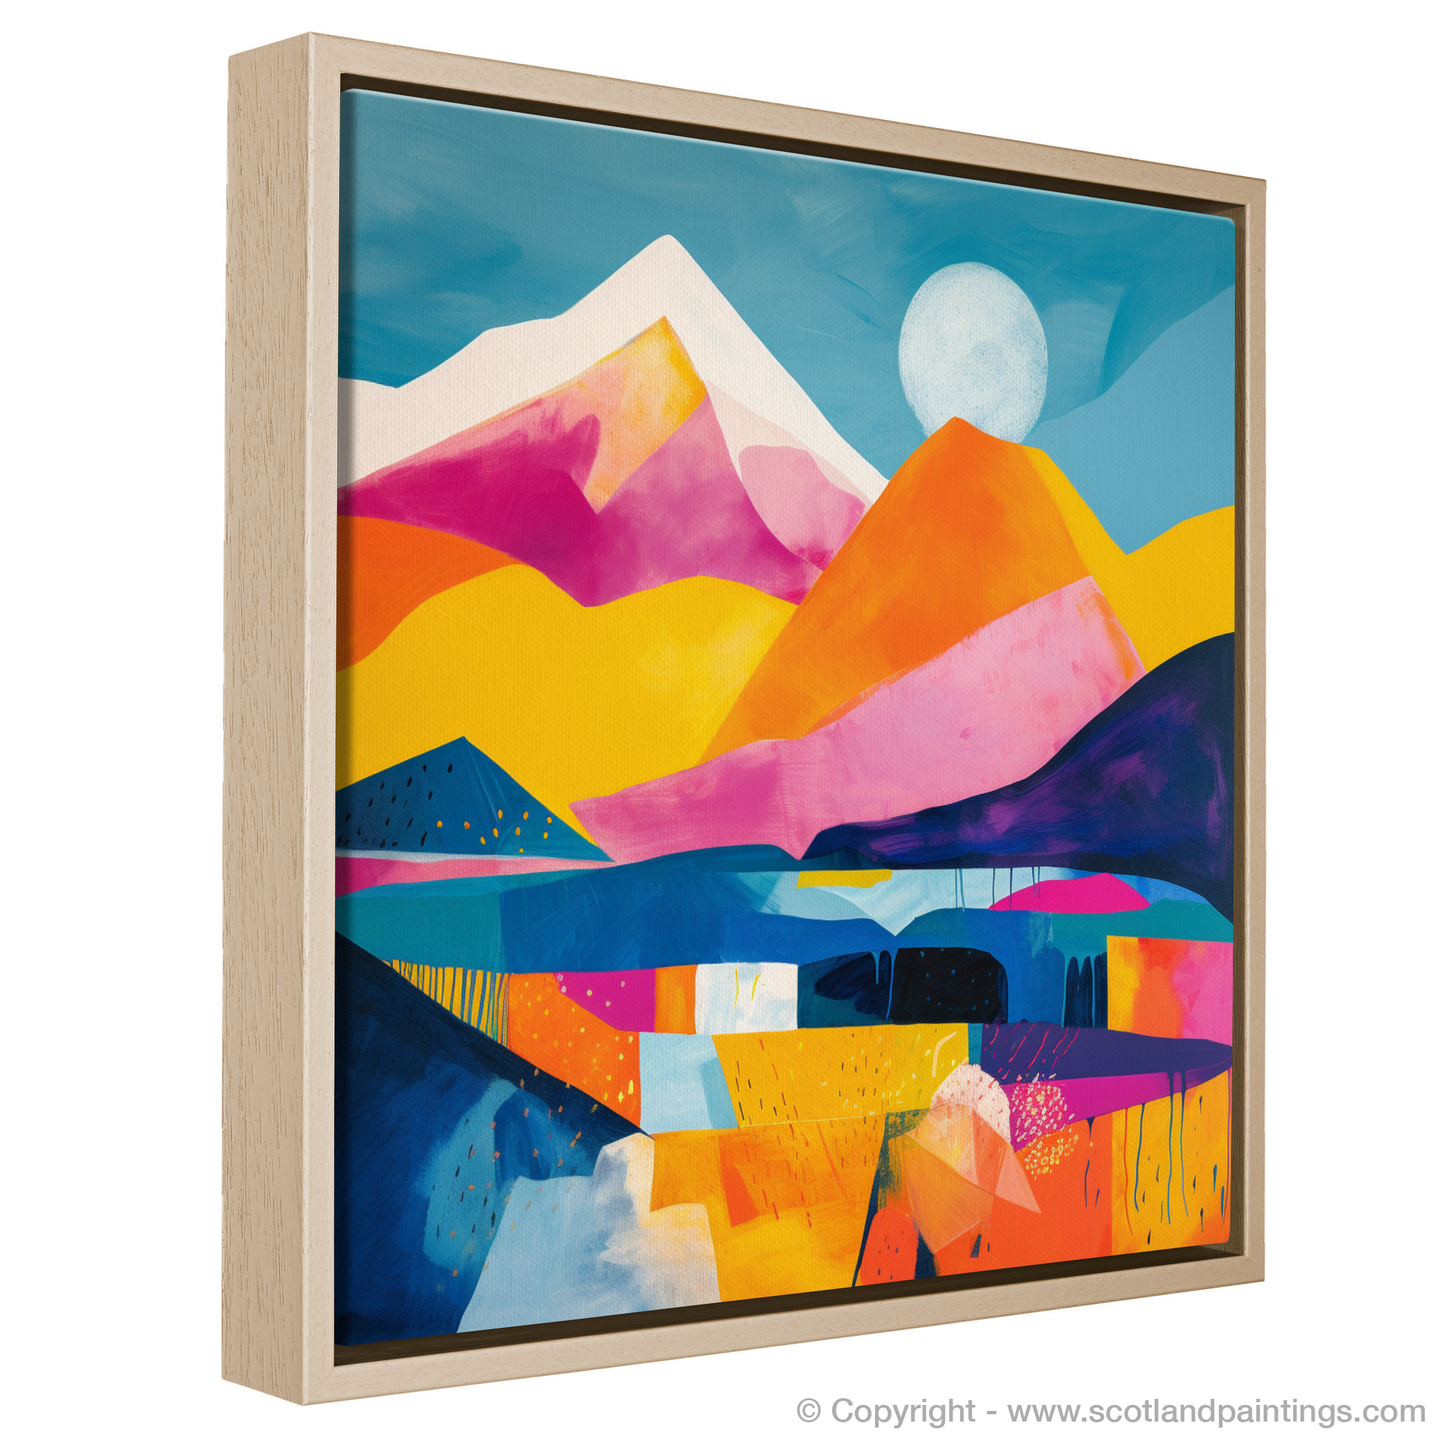 Painting and Art Print of Ben Nevis entitled "Abstract Majesty of Ben Nevis".